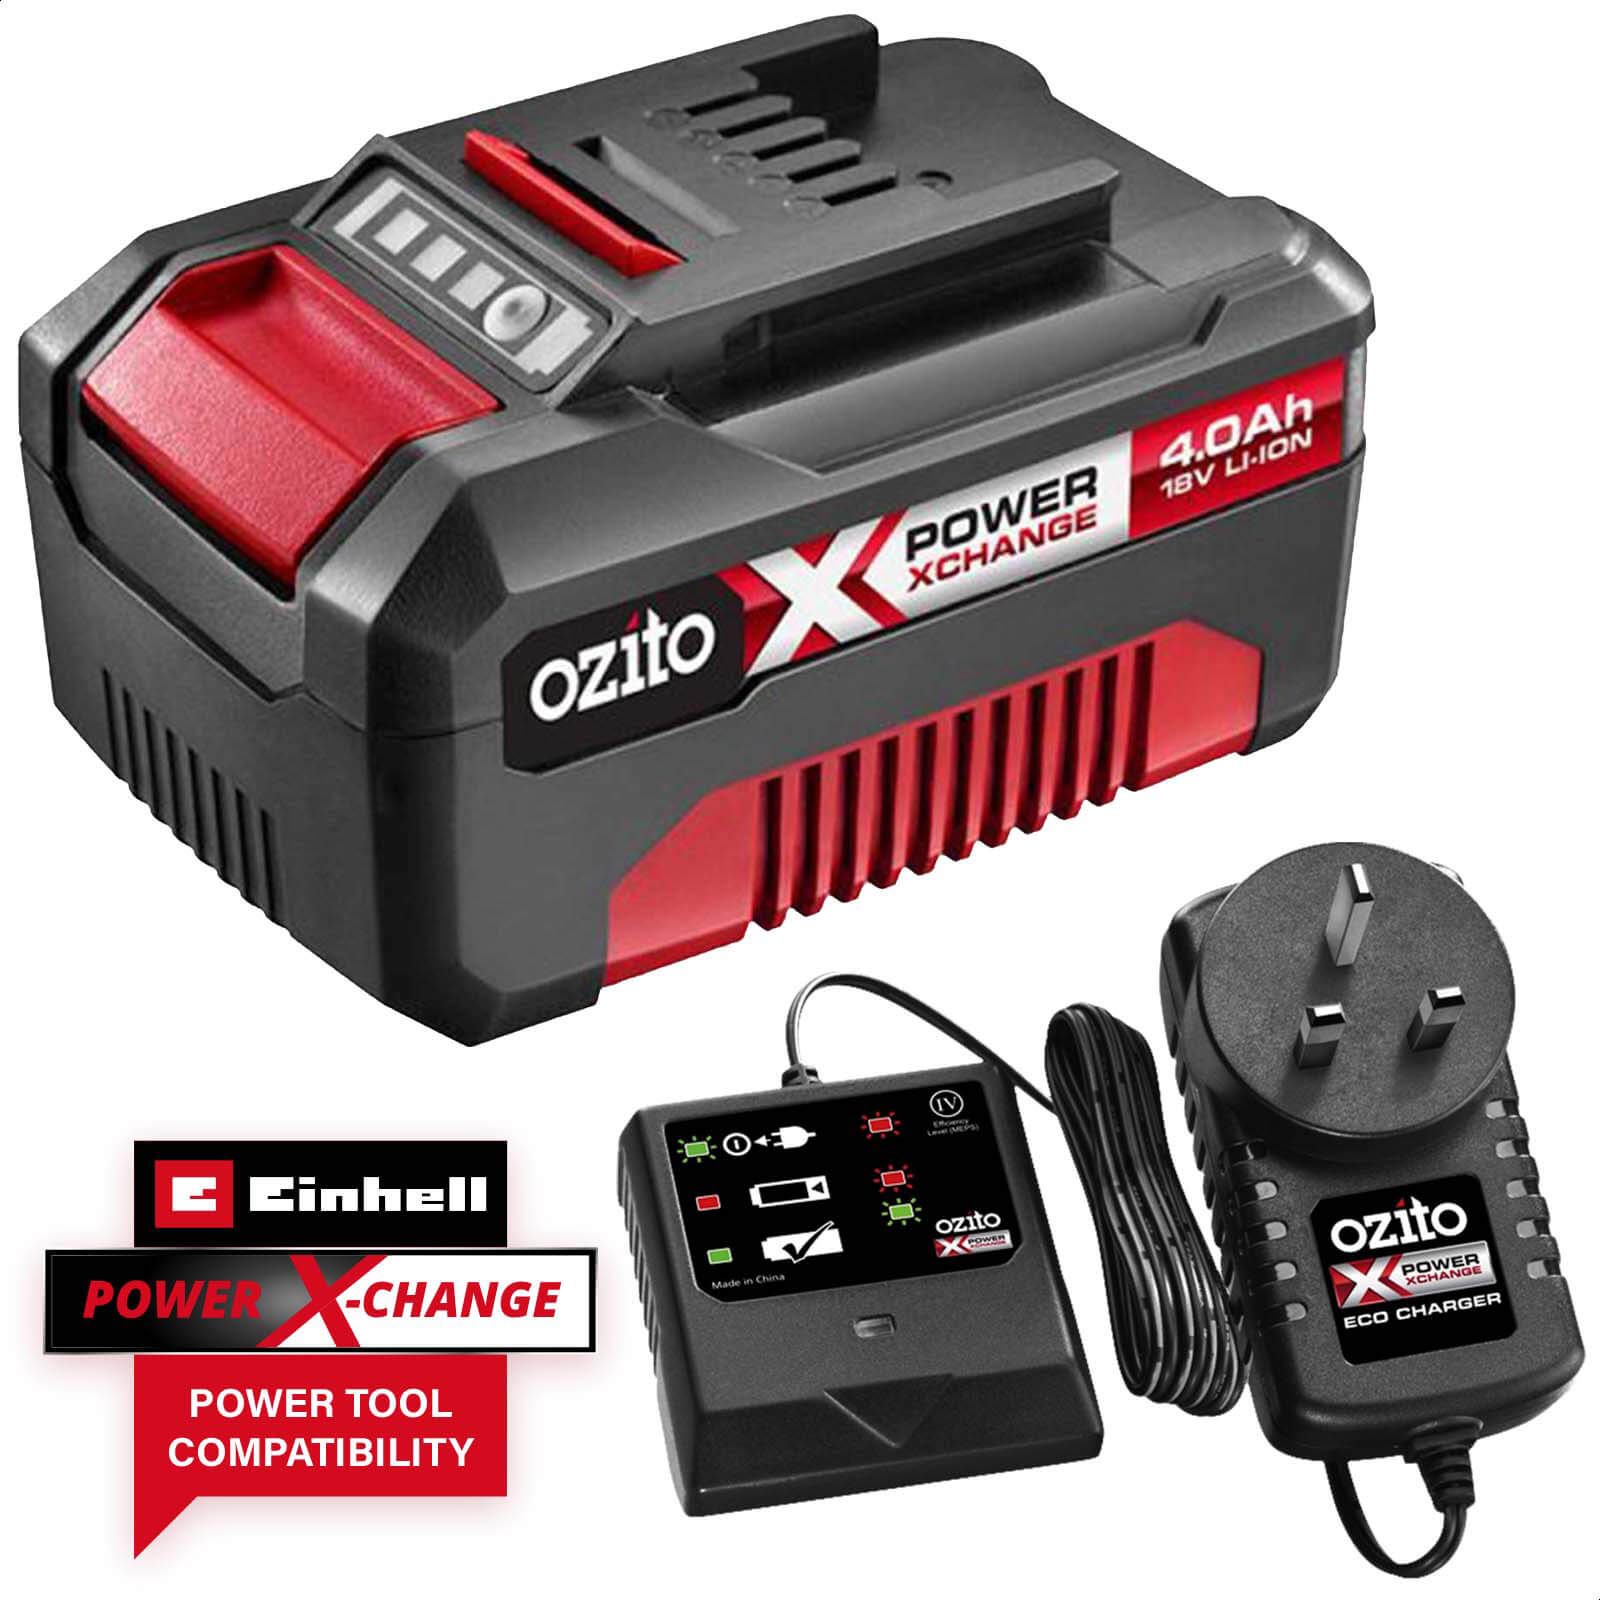 Image of Ozito Genuine 18v Cordless Power X-Change Li-ion Battery 4ah and Eco Charger 4ah